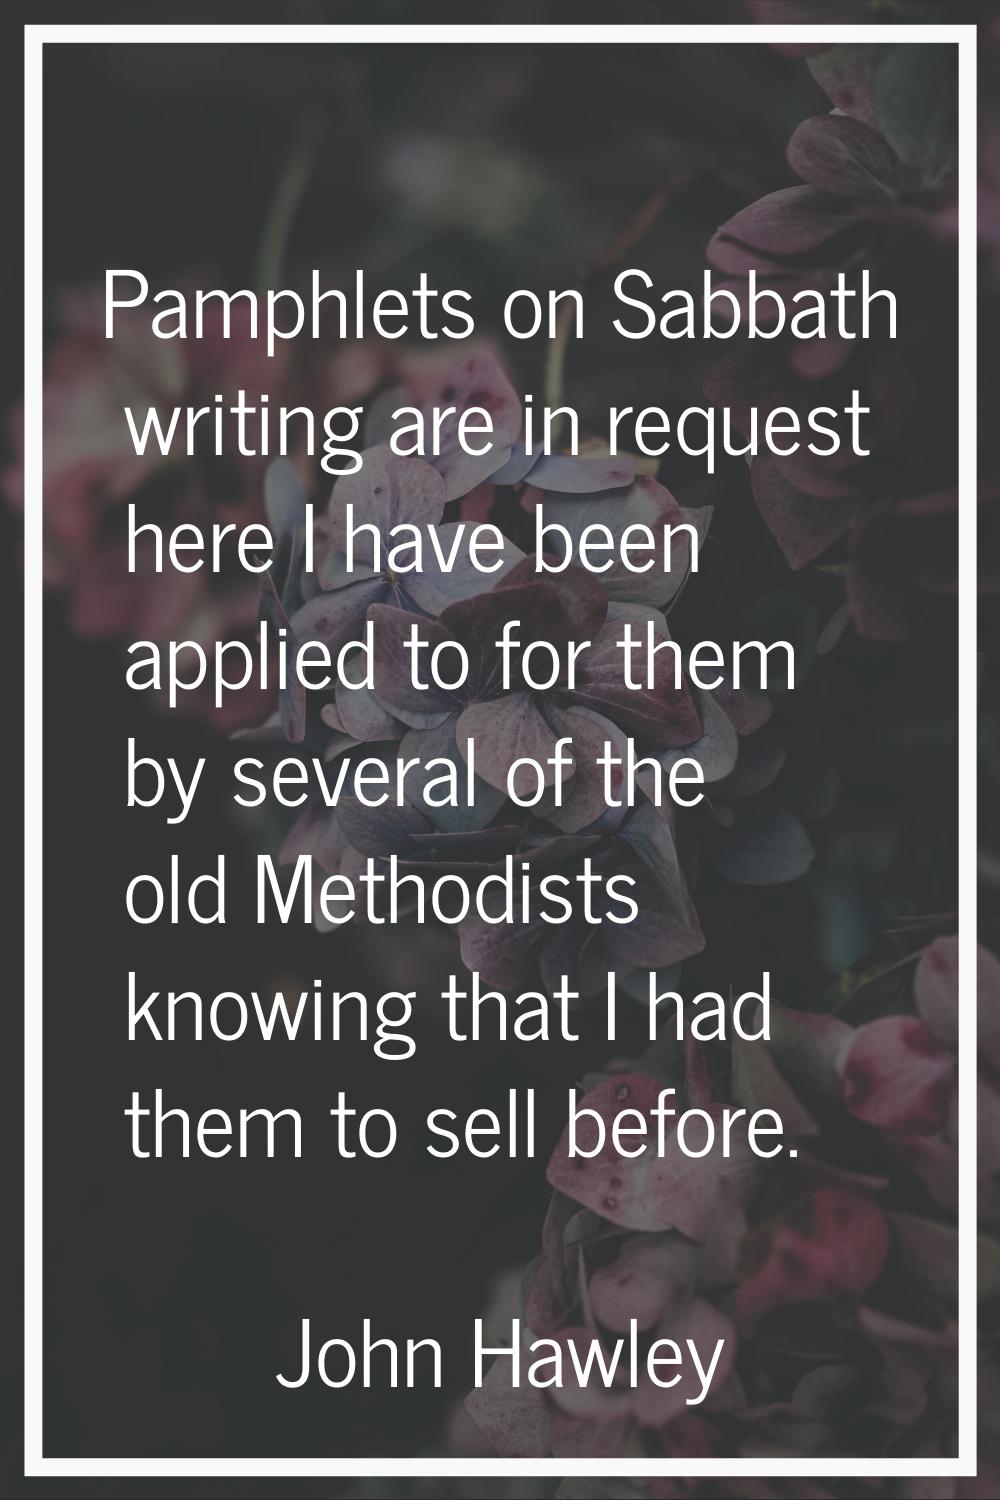 Pamphlets on Sabbath writing are in request here I have been applied to for them by several of the 